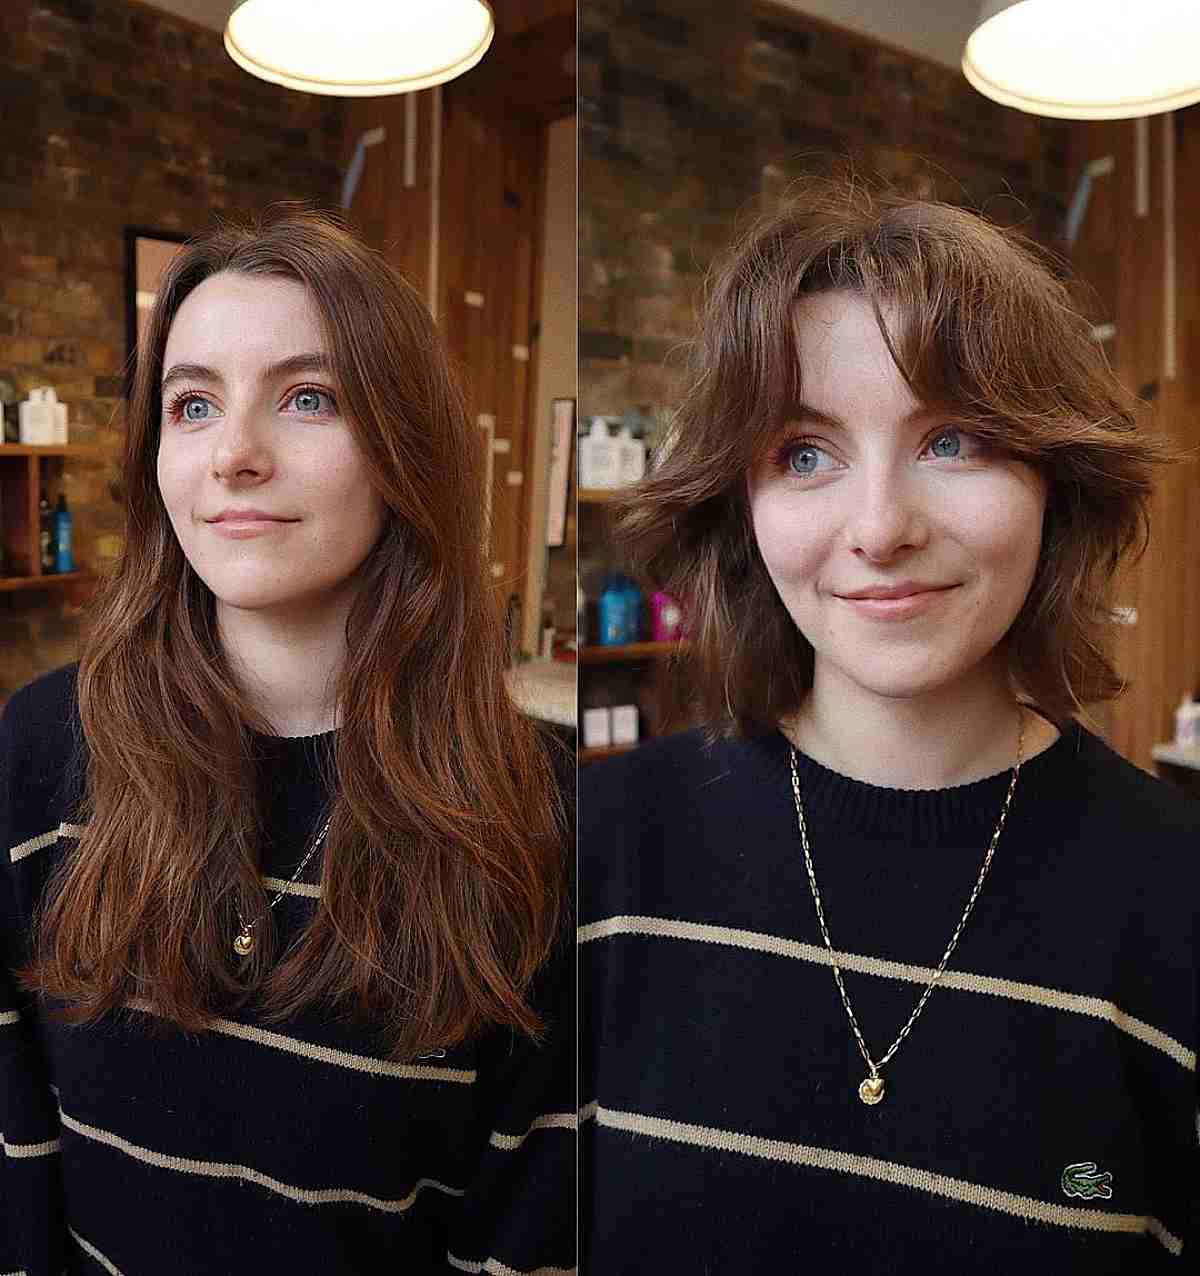 Short Chin-Length Shaggy Wolf Cut with Middle Part Bangs